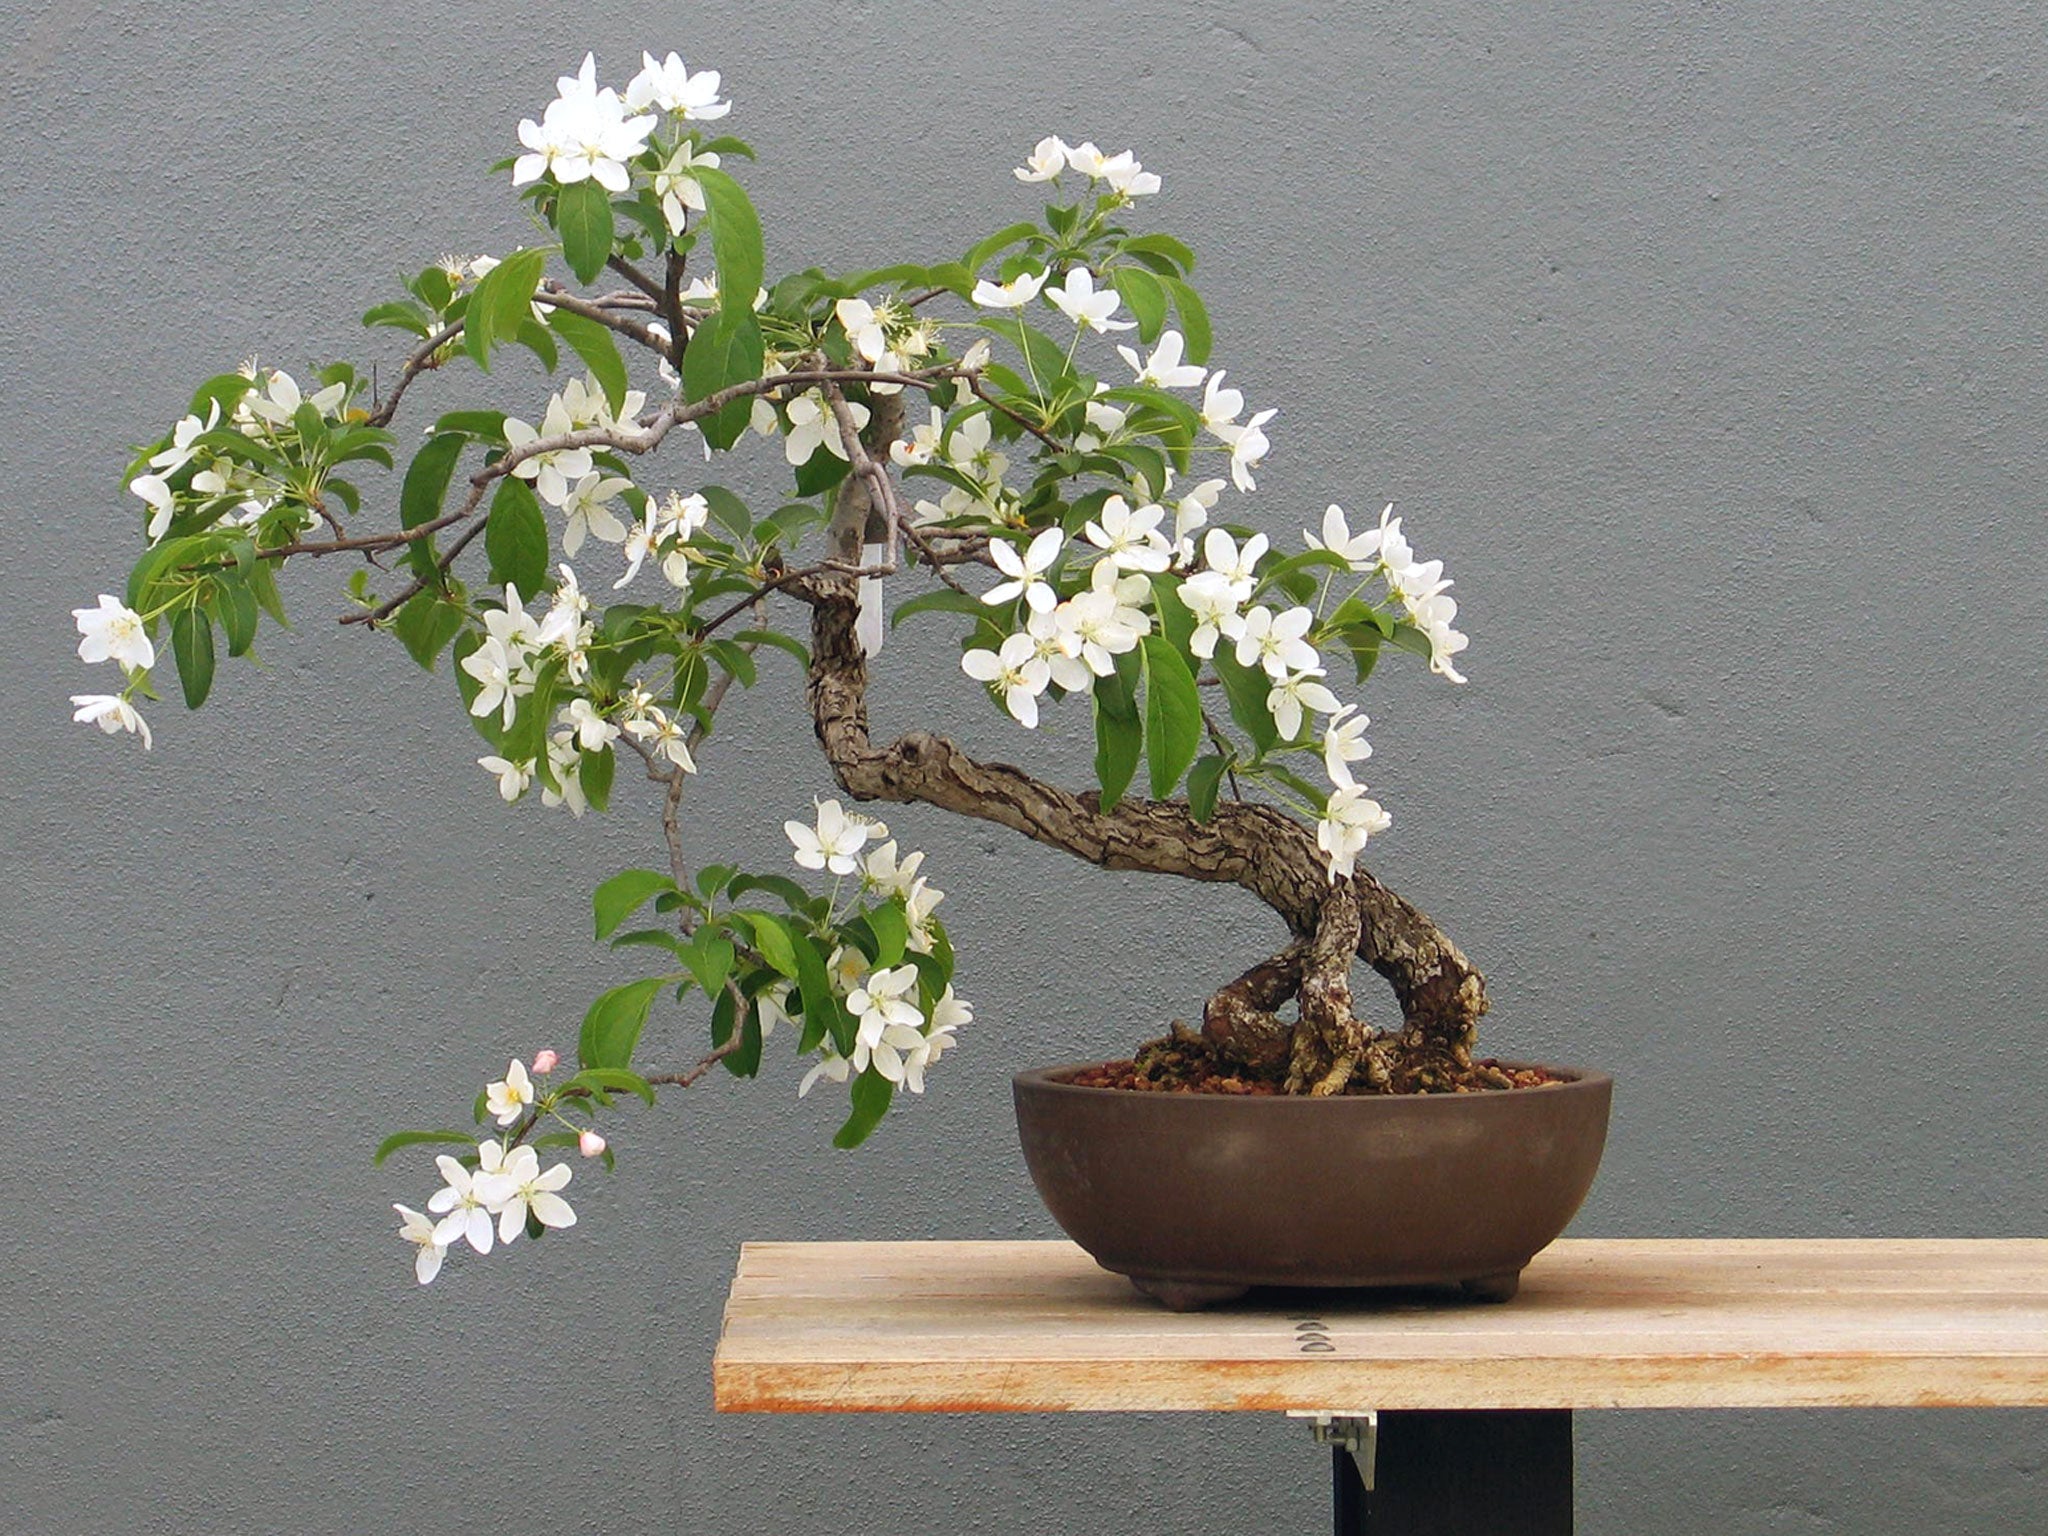 A Malus slant style bonsai in Spring in New York